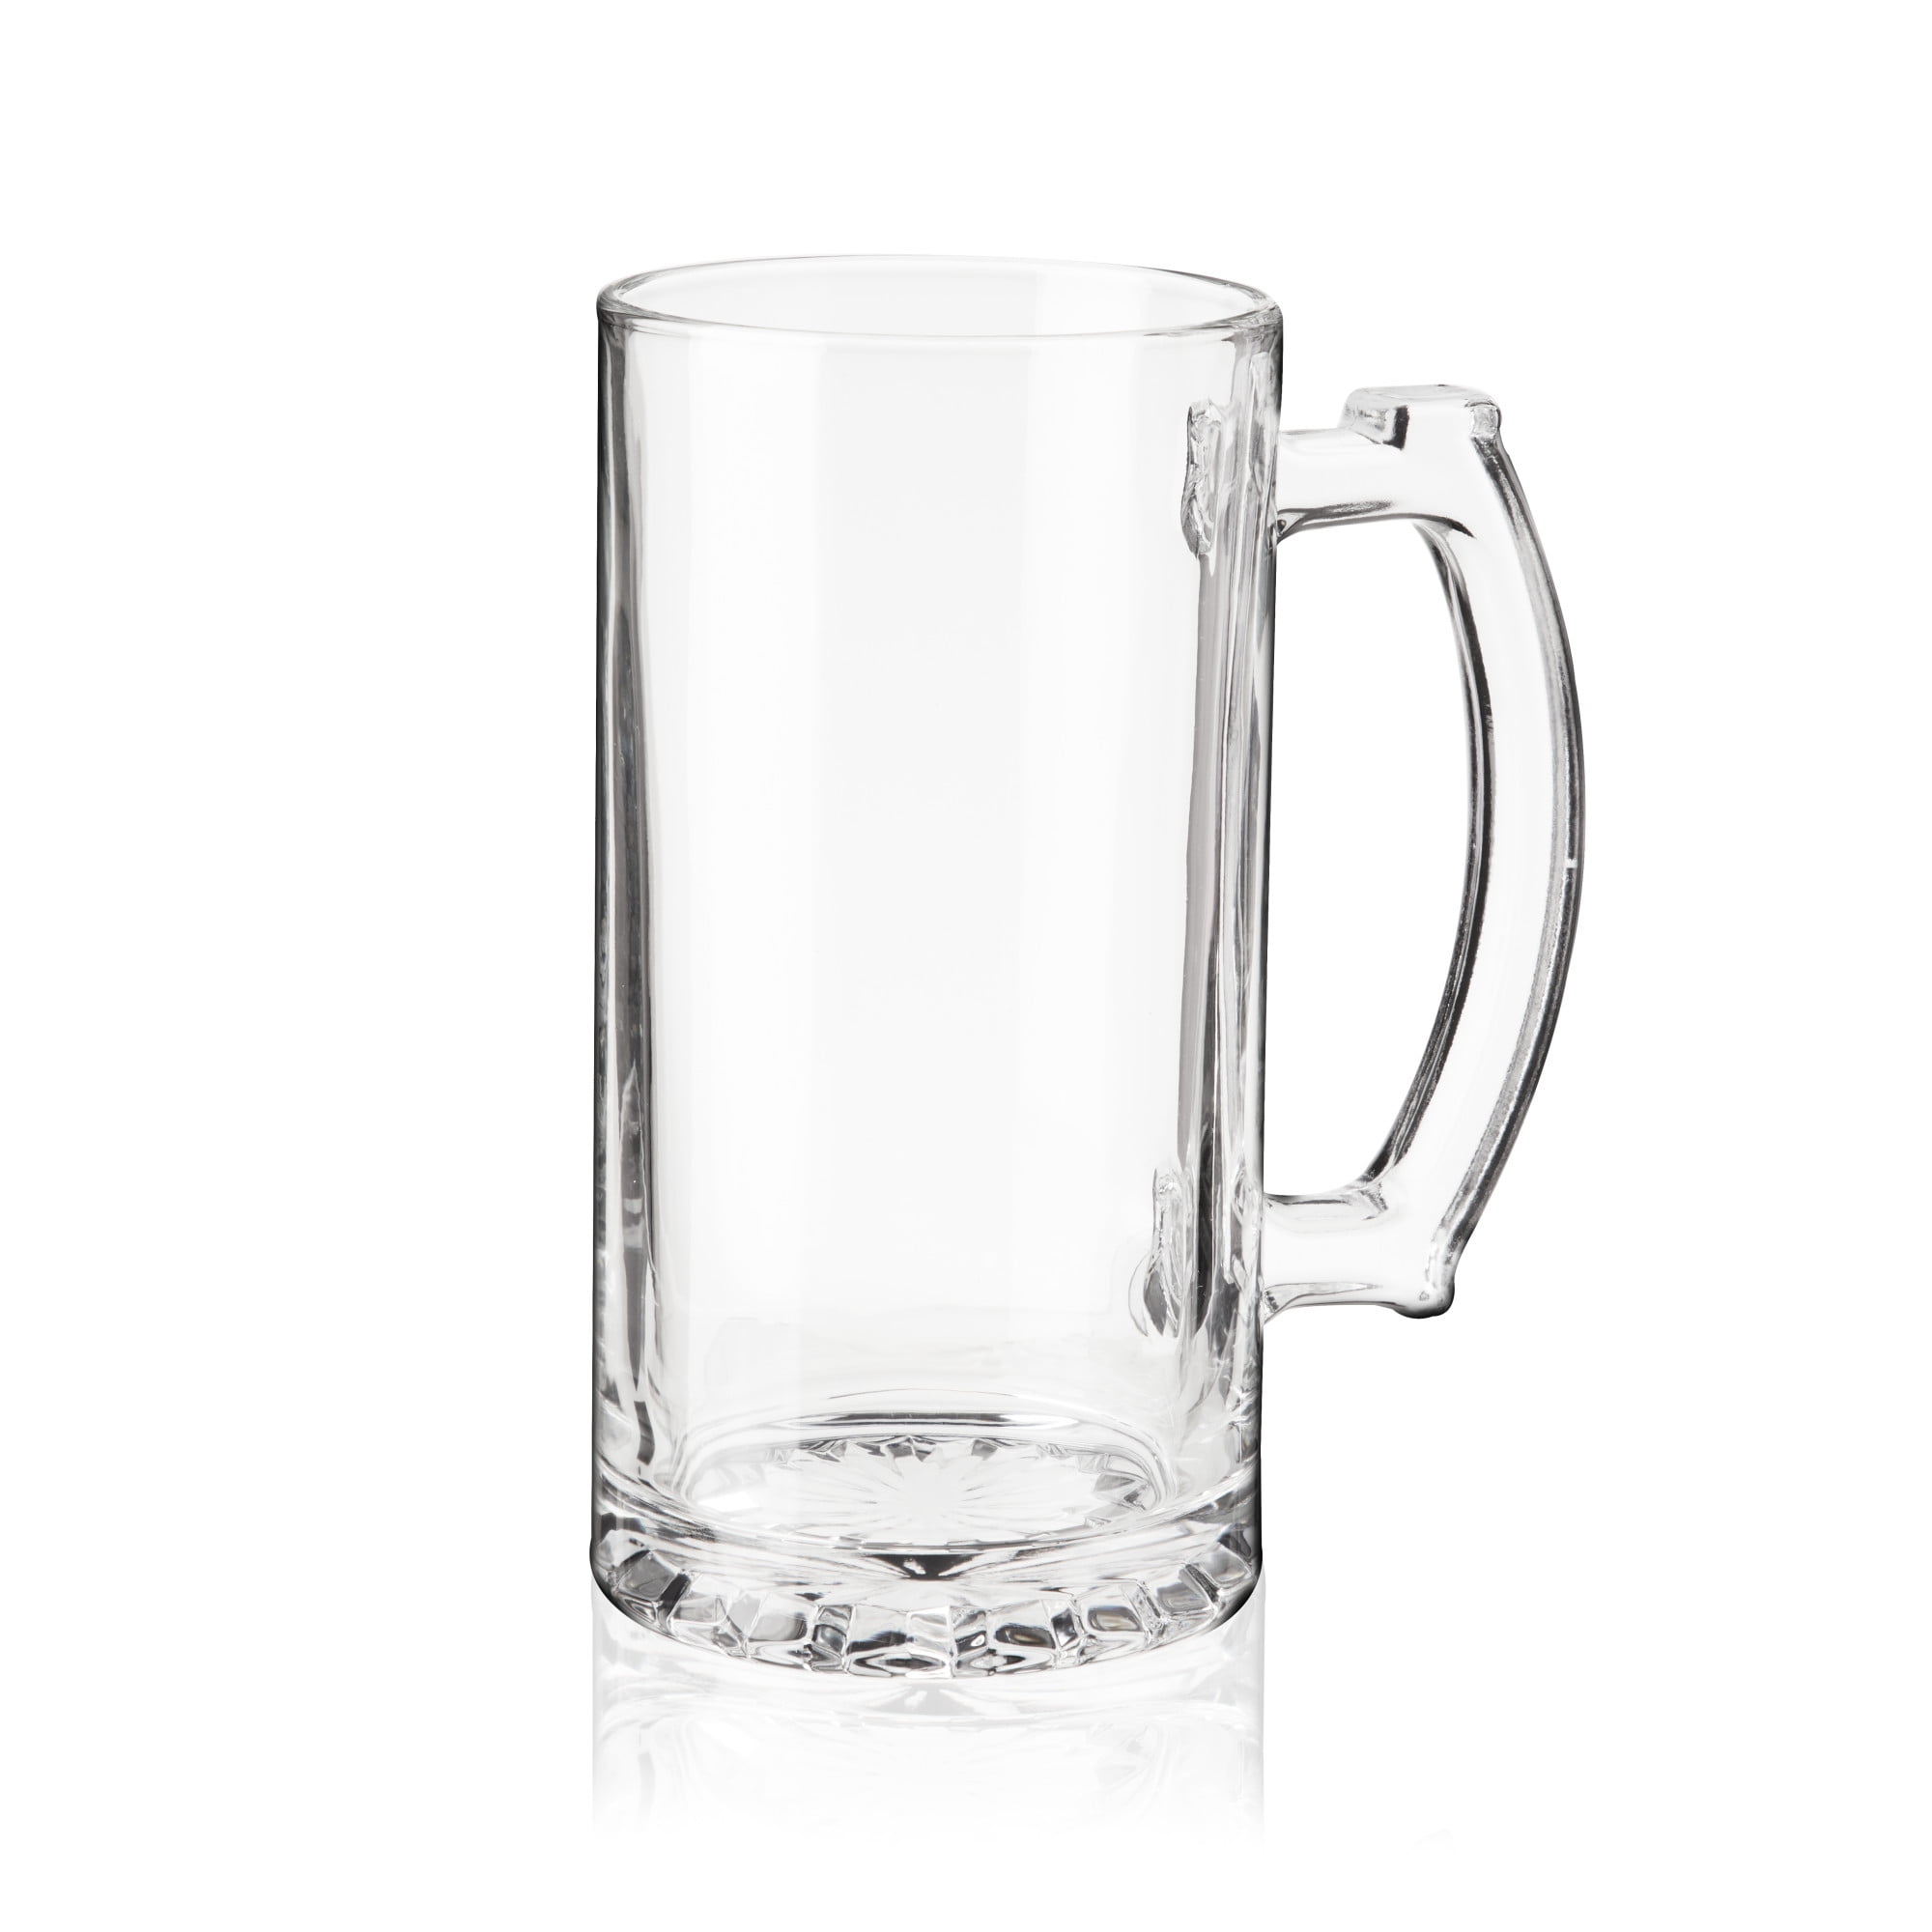 Madison - 17 Ounce Beer Mug | Thick and Heavy Glass Beer Steins – Heavy  Base Prevents Tipping – Extra Large Cup Holds A Full Pint Of Beer – Set of  6